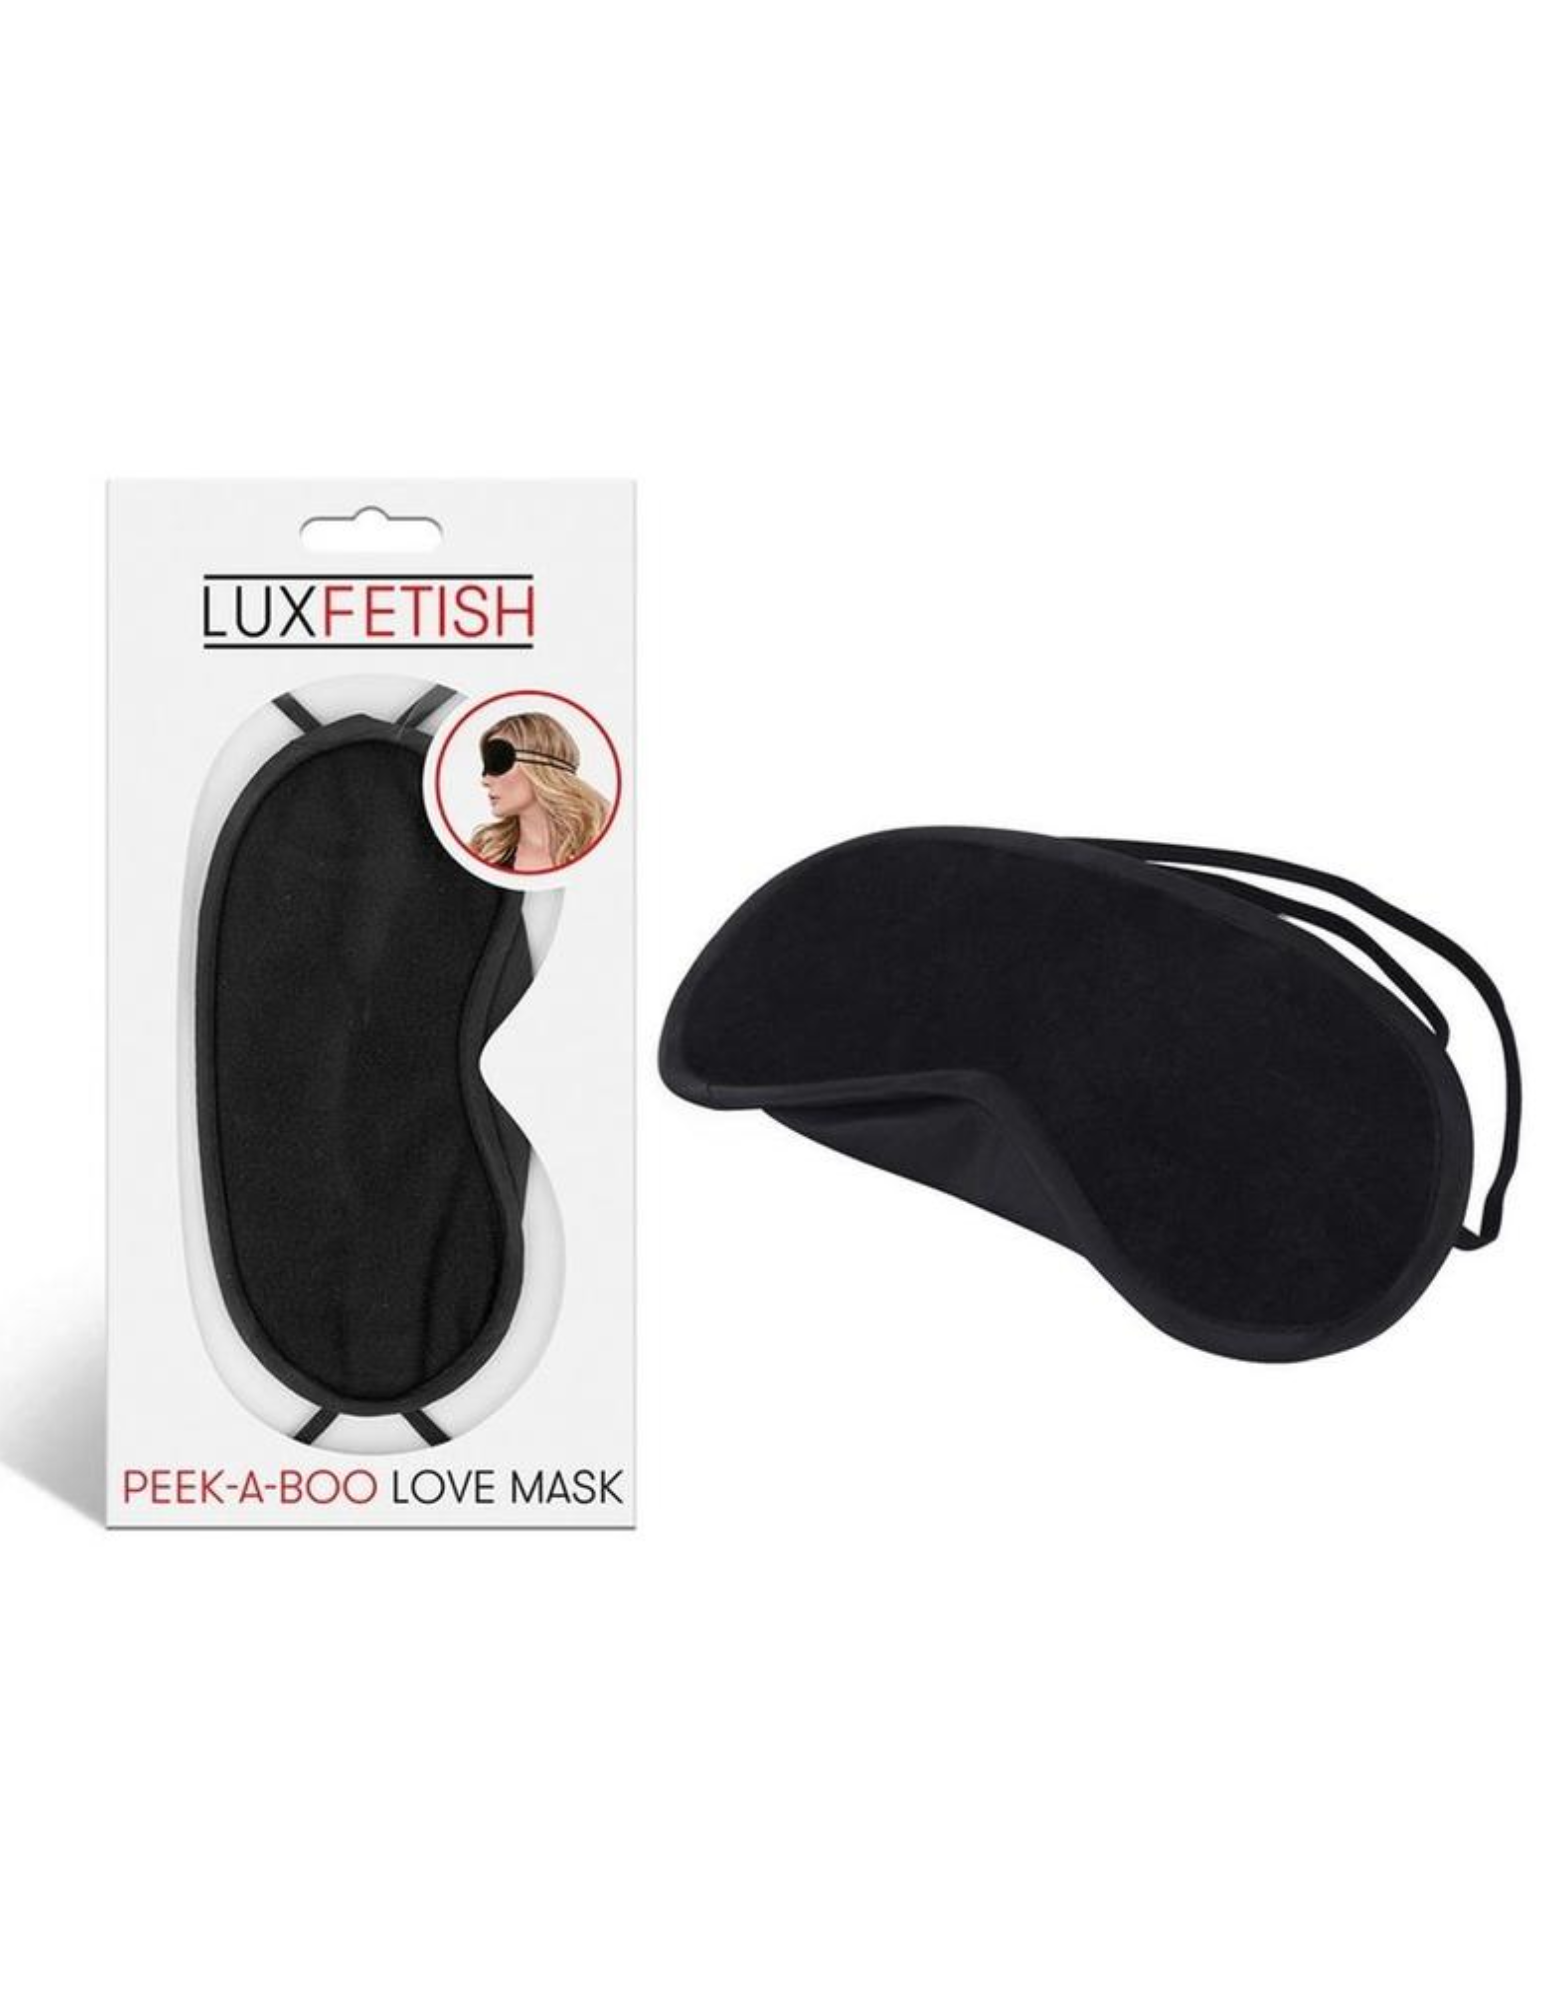 Lux Fetish Love Mask in its package (black).